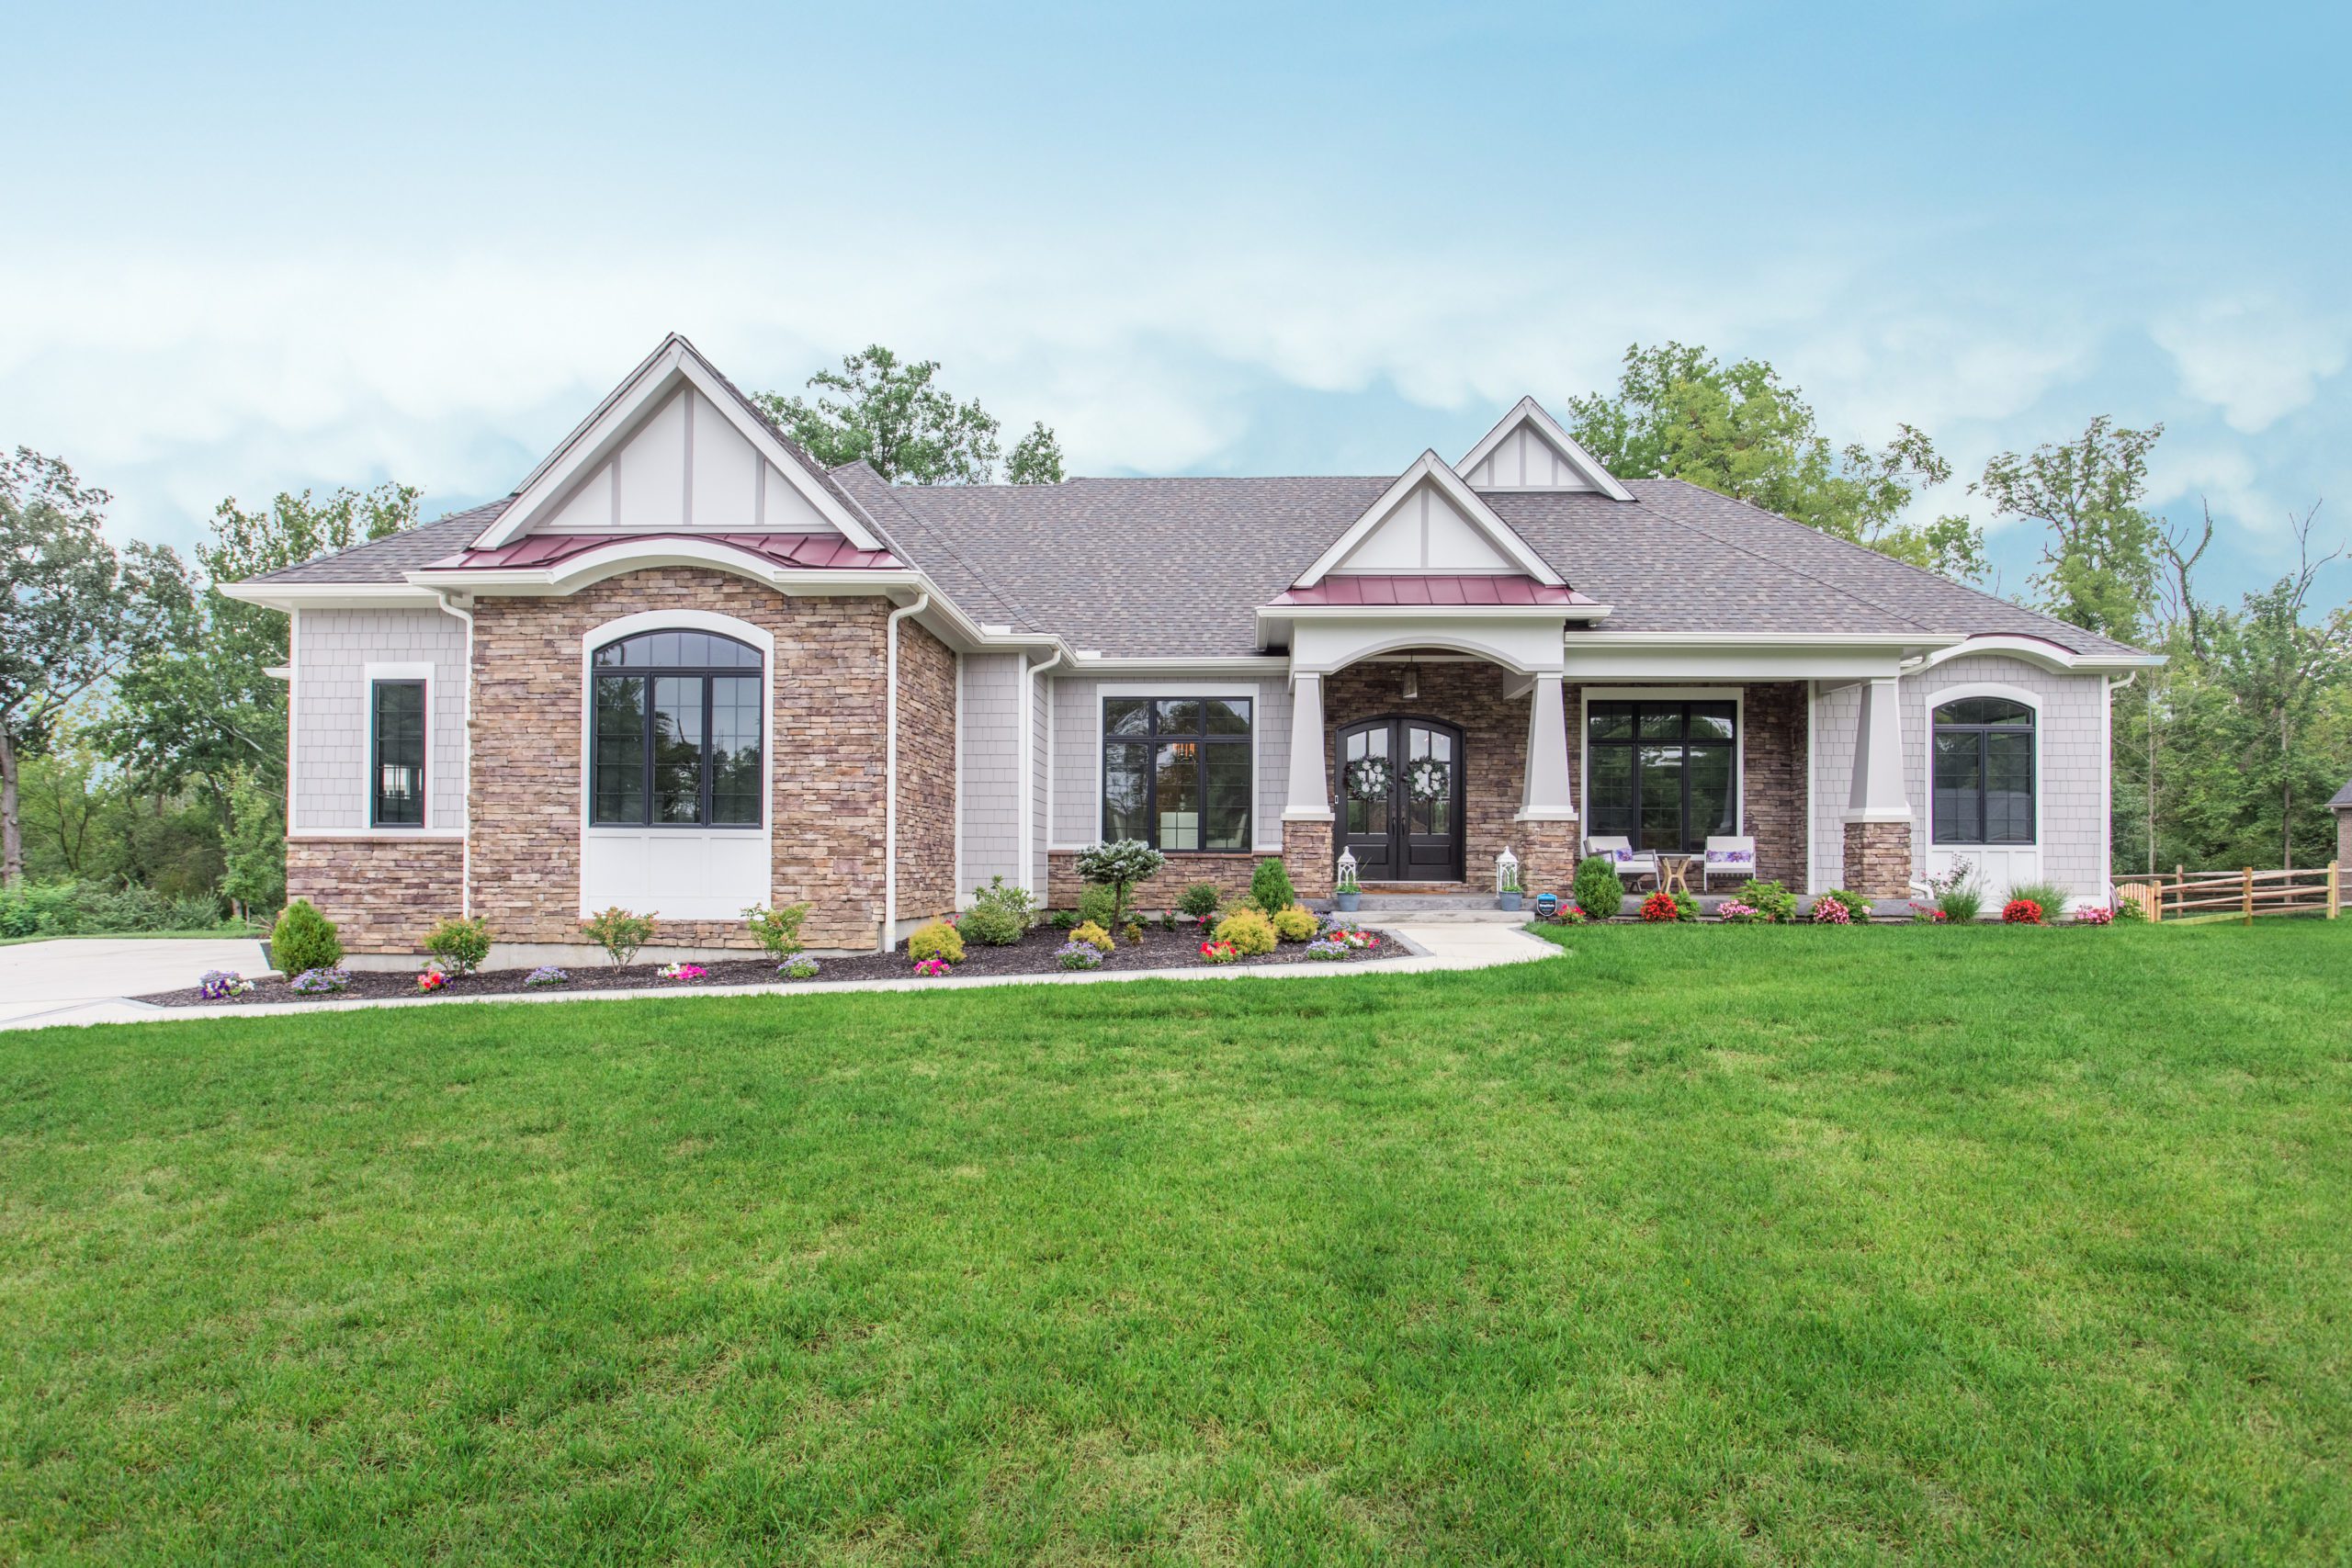 Liberty Township | Transitional | Redknot Homes